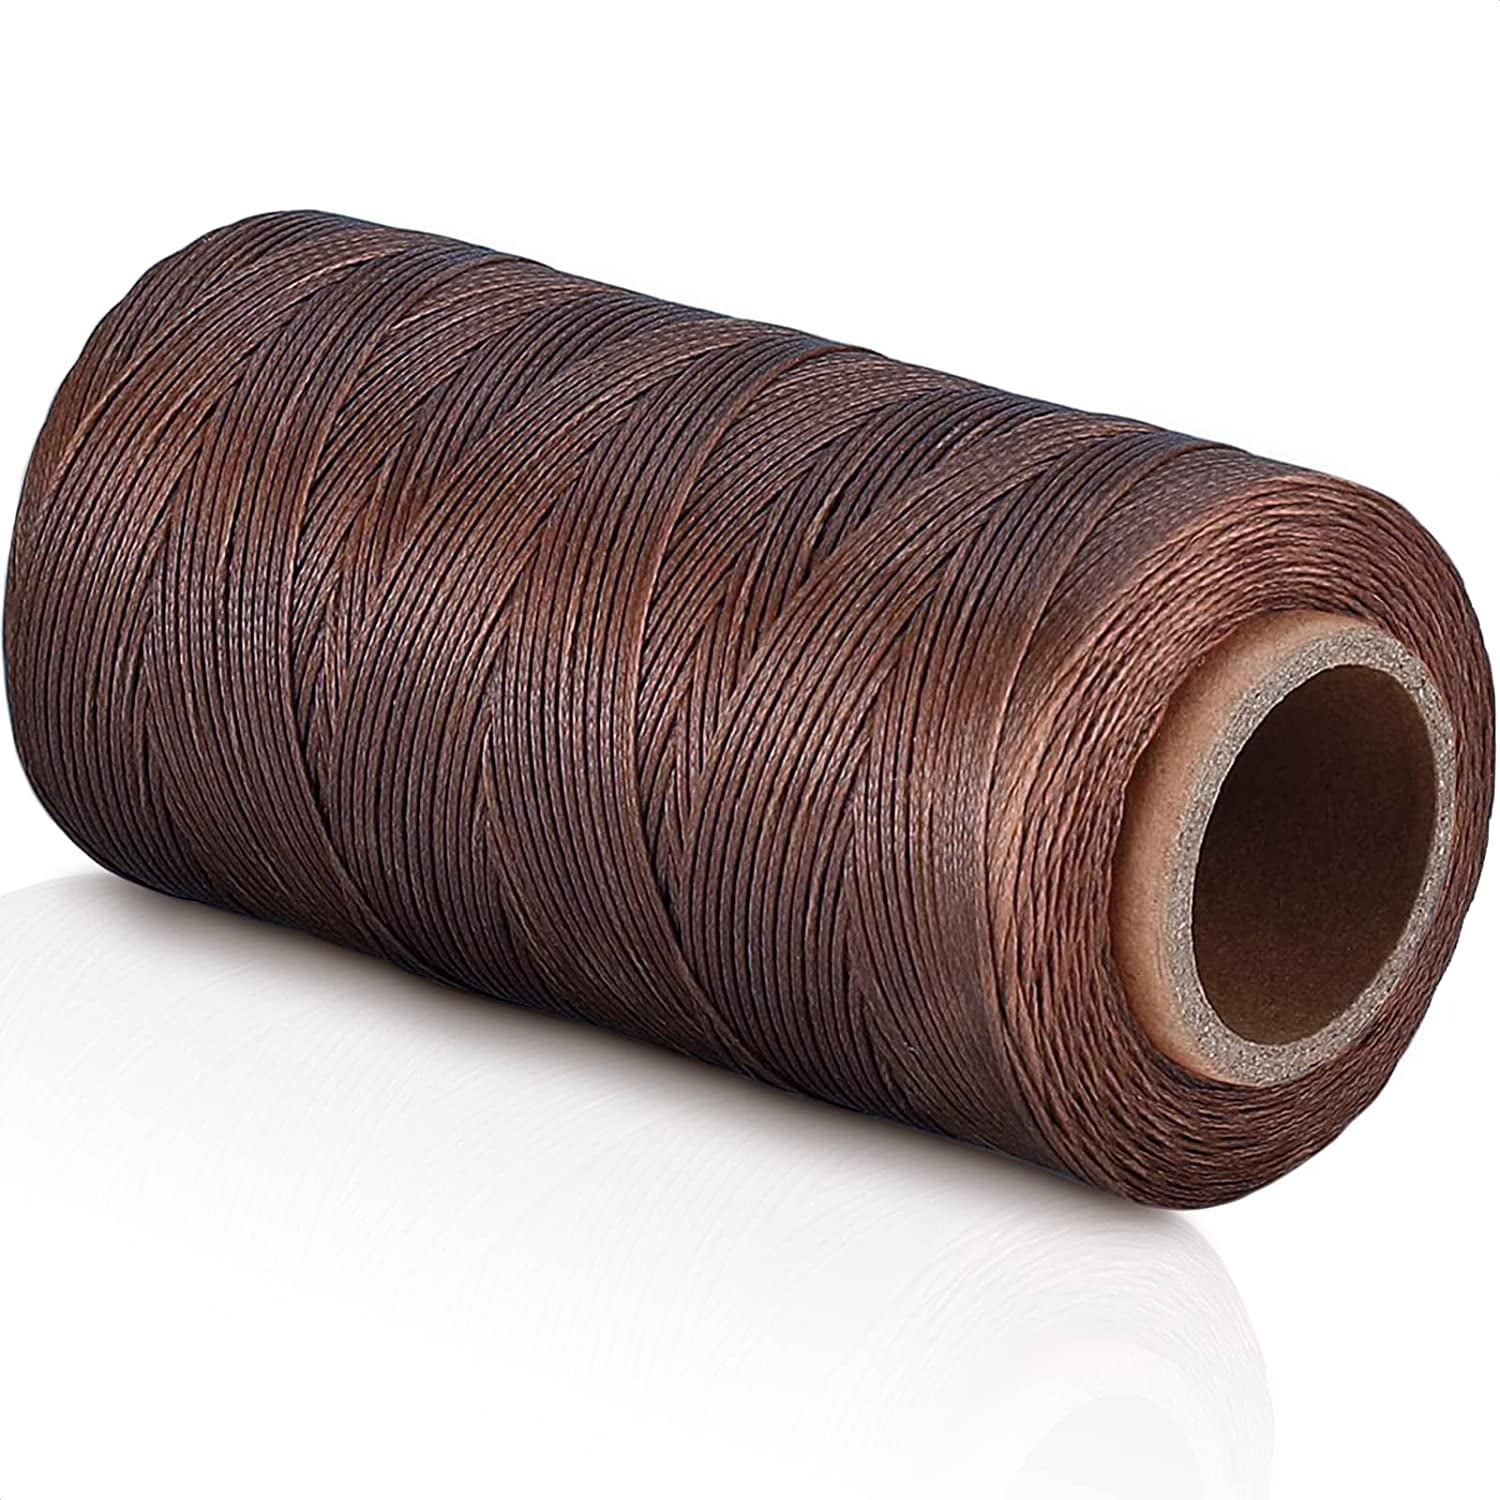 Waxed Thread for Leather Sewing - 284 Yards 150d 1mm Brown Thread for  Sewing Hair Leather Sewing Waxed Leather Thread Sewing Machine Thread for